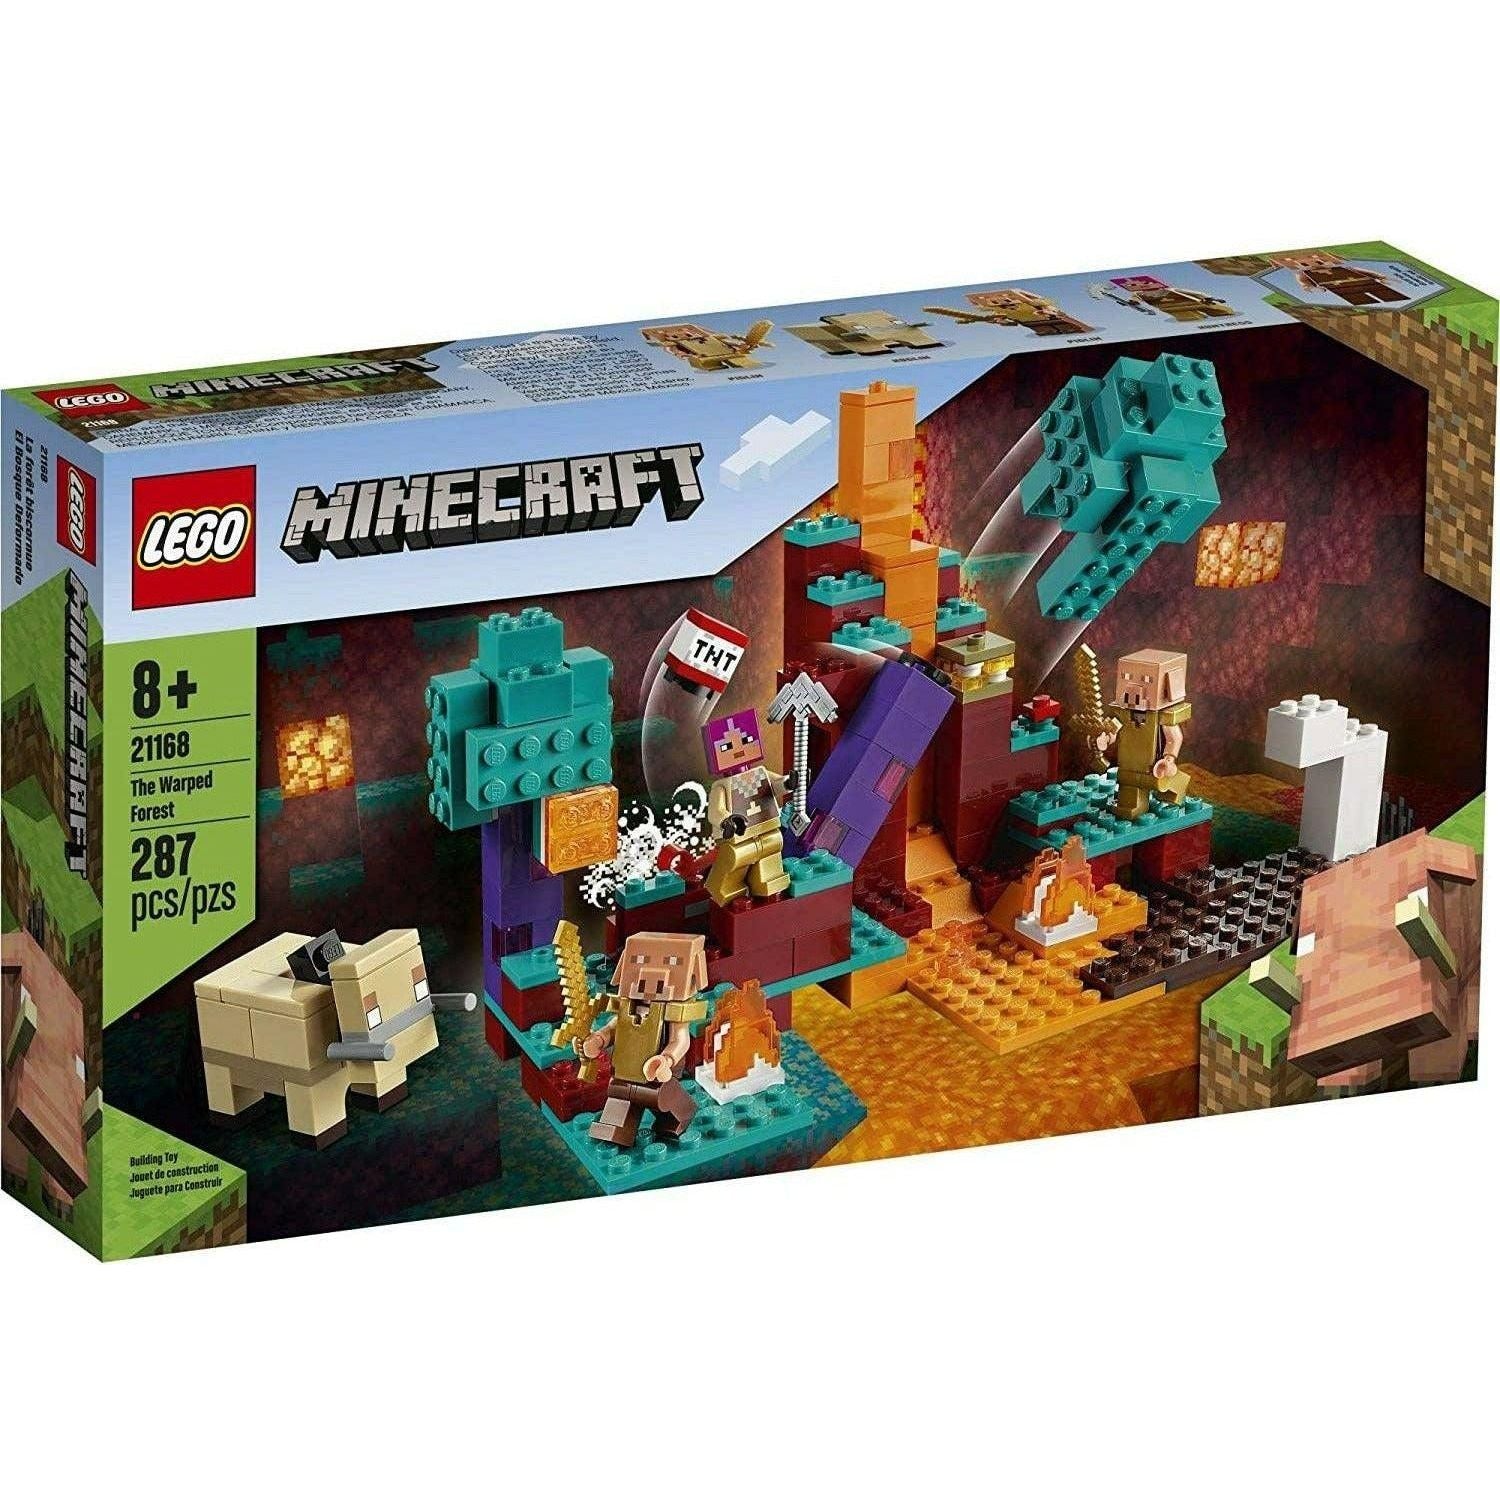 LEGO Minecraft The Warped Forest 21168 Hands-on Minecraft Nether Creative Playset (287 Pieces) - BumbleToys - 5-7 Years, Animals, Boys, LEGO, Minecraft, OXE, Pre-Order